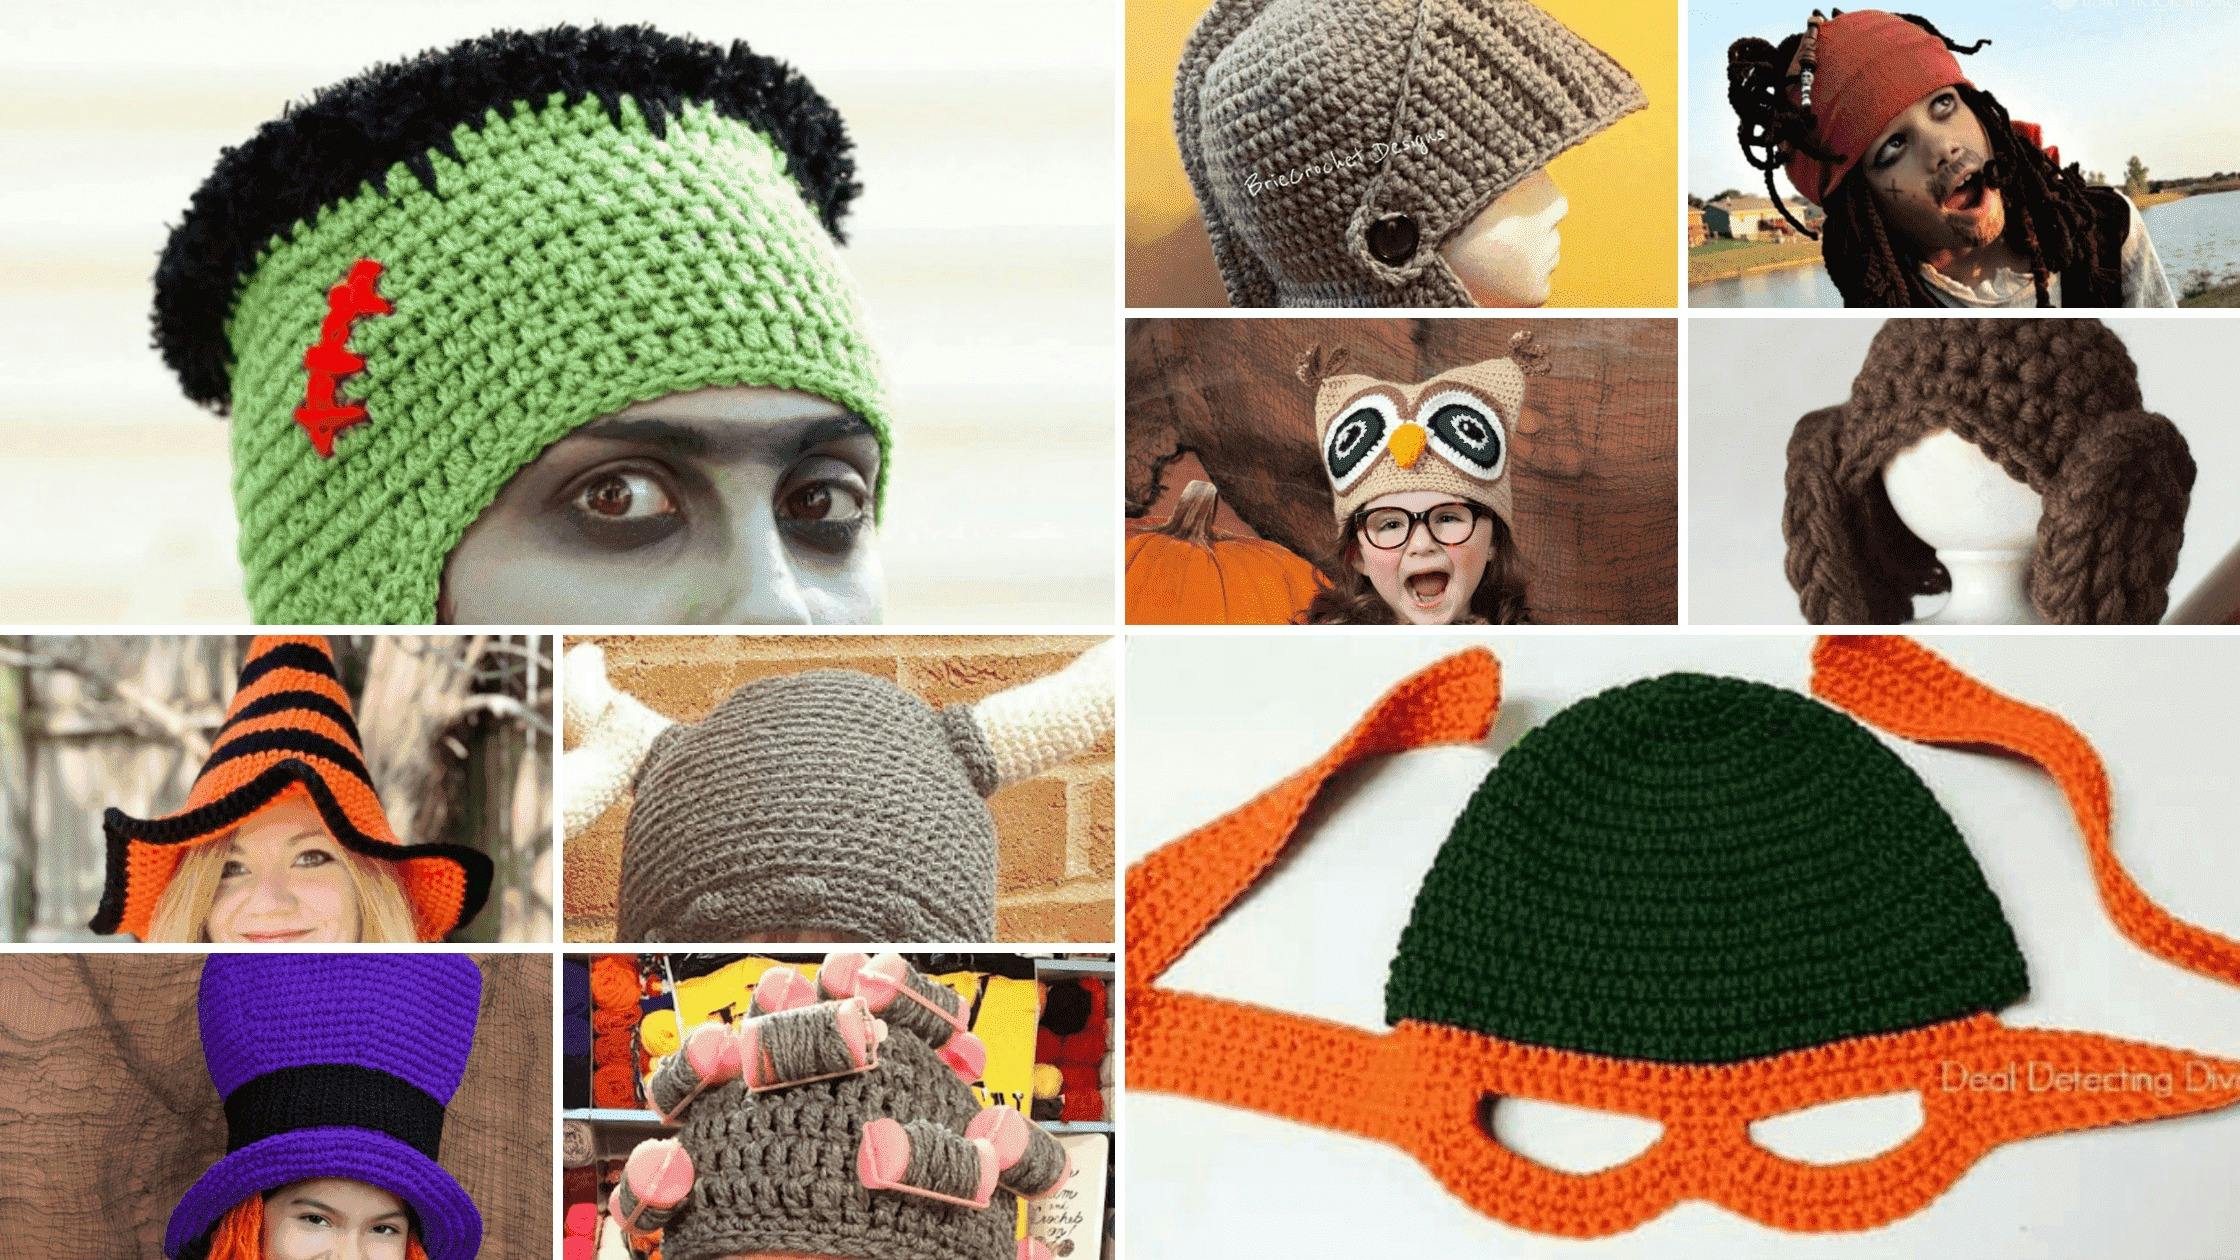 10 Quick Crochet Halloween Costumes for All Ages